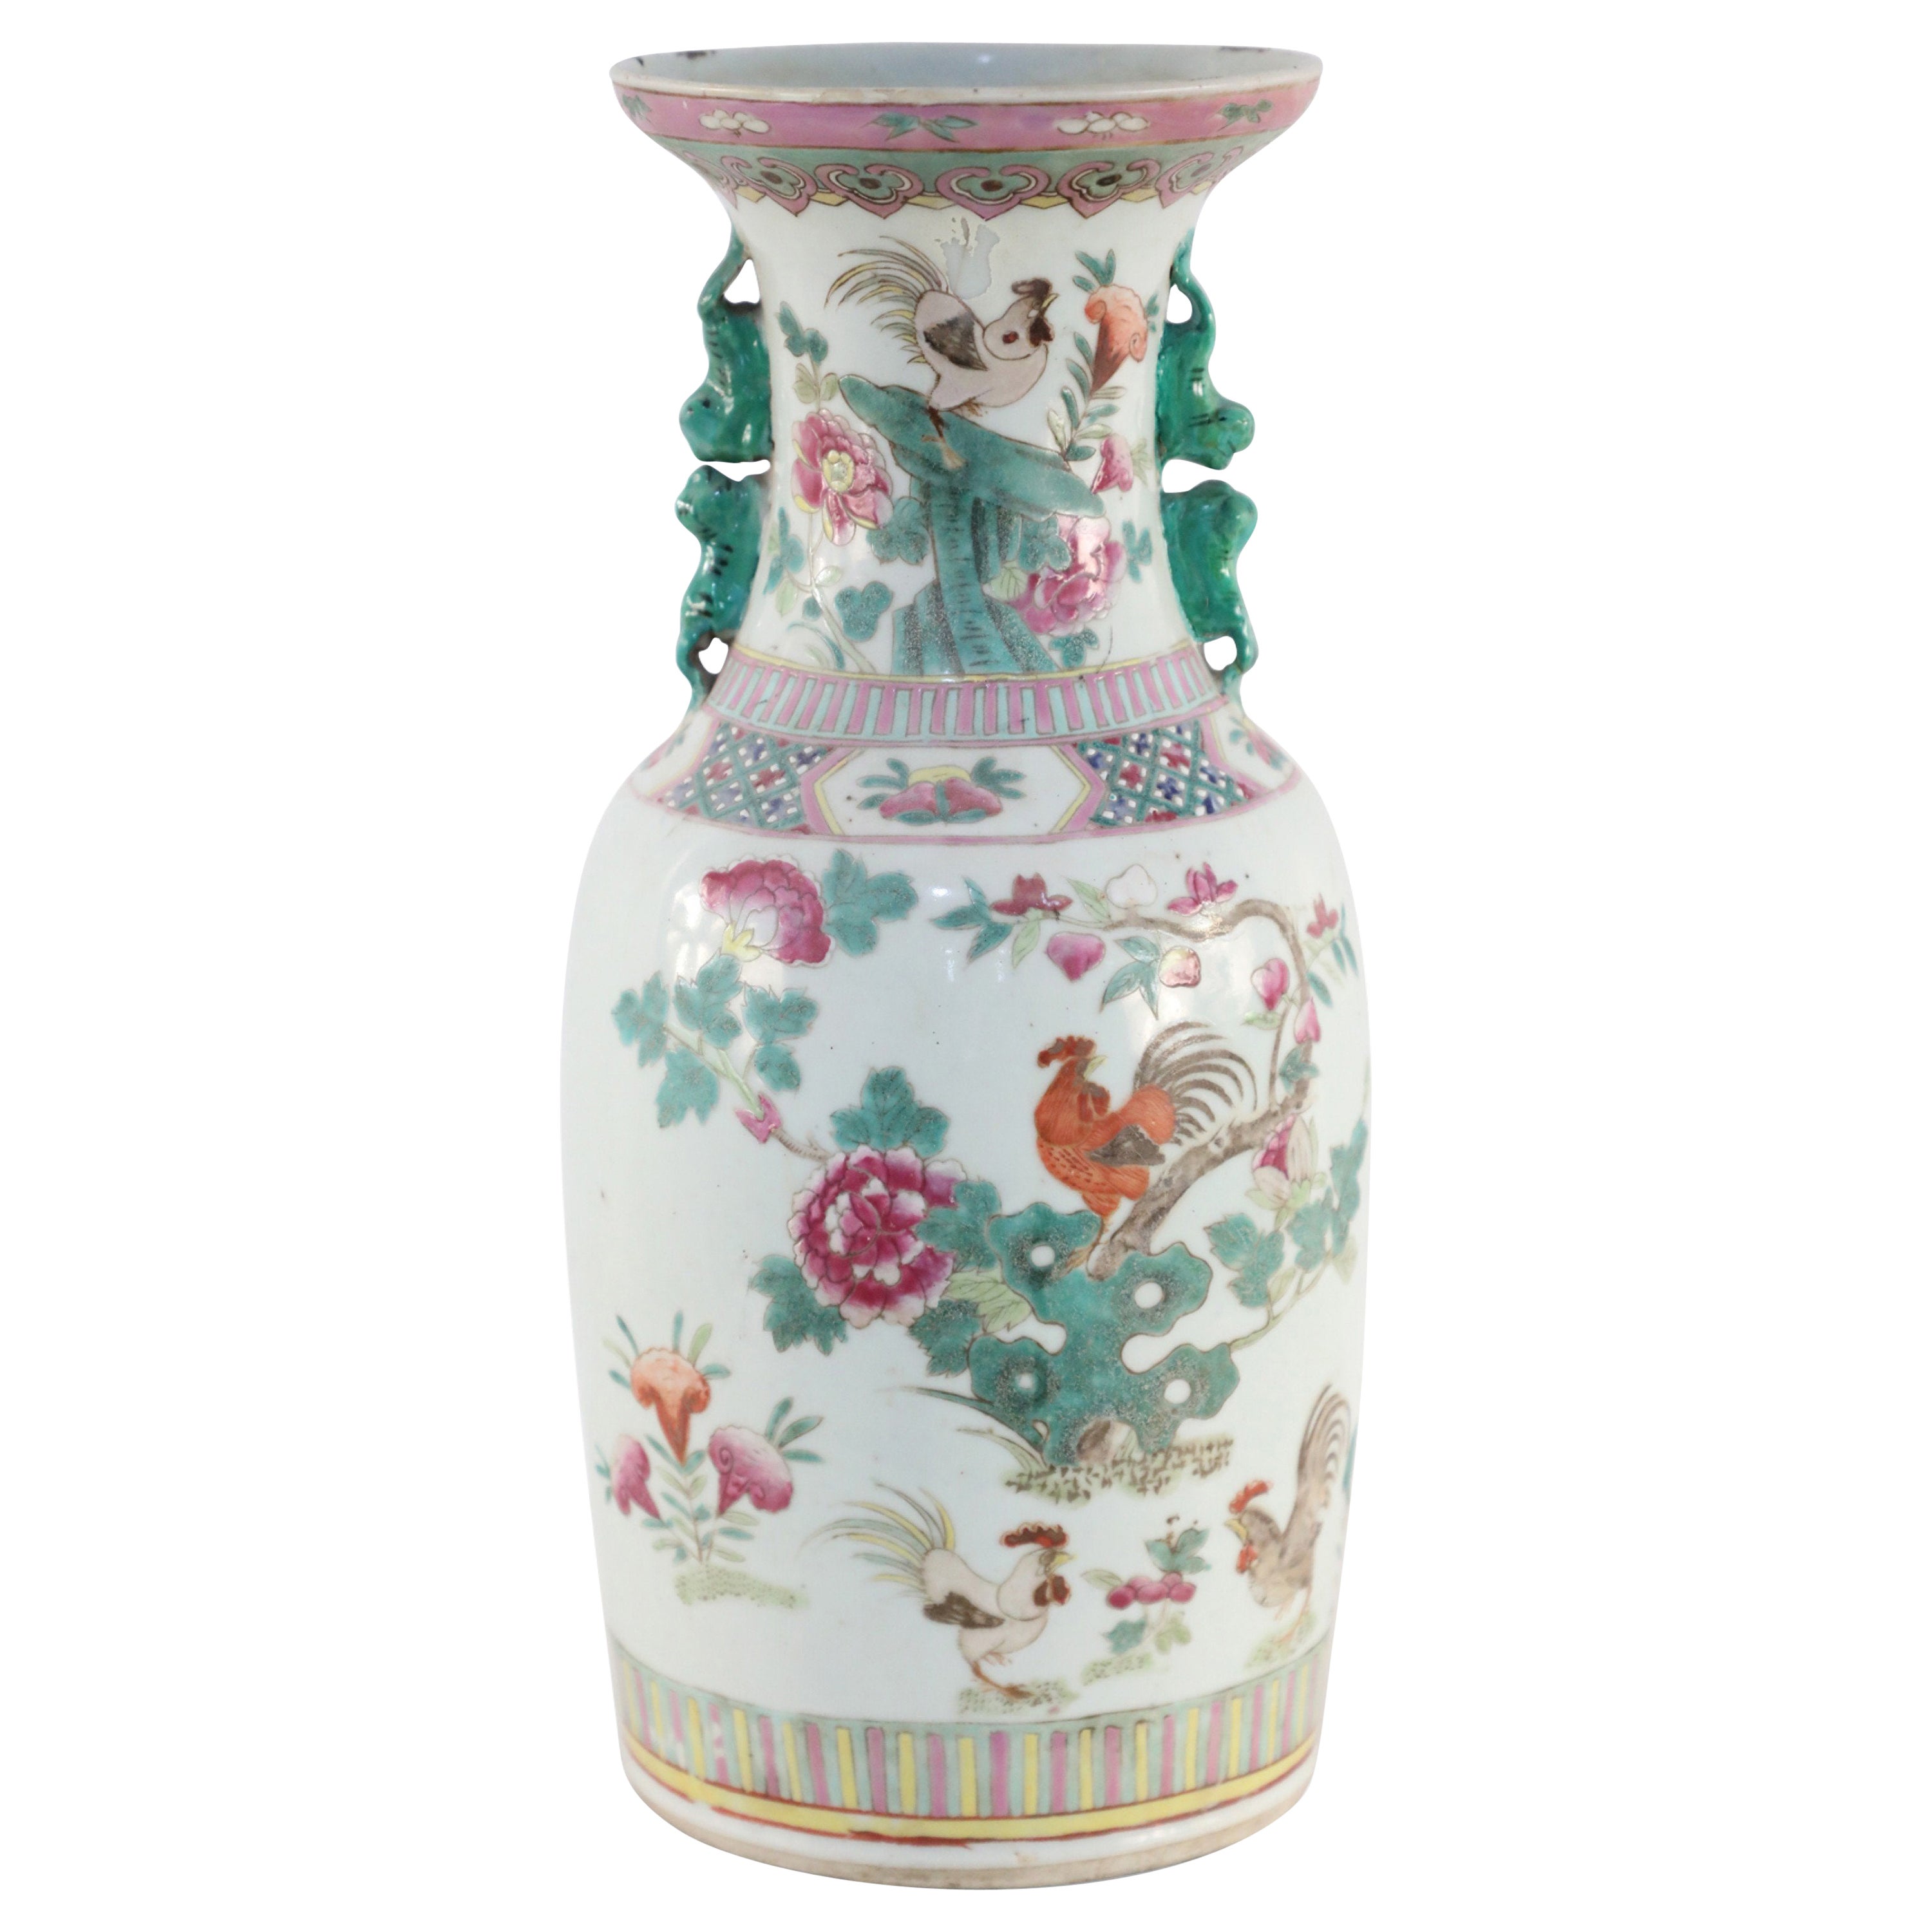 Chinese White, Green, and Pink Floral and Rooster Design Porcelain Urn For Sale